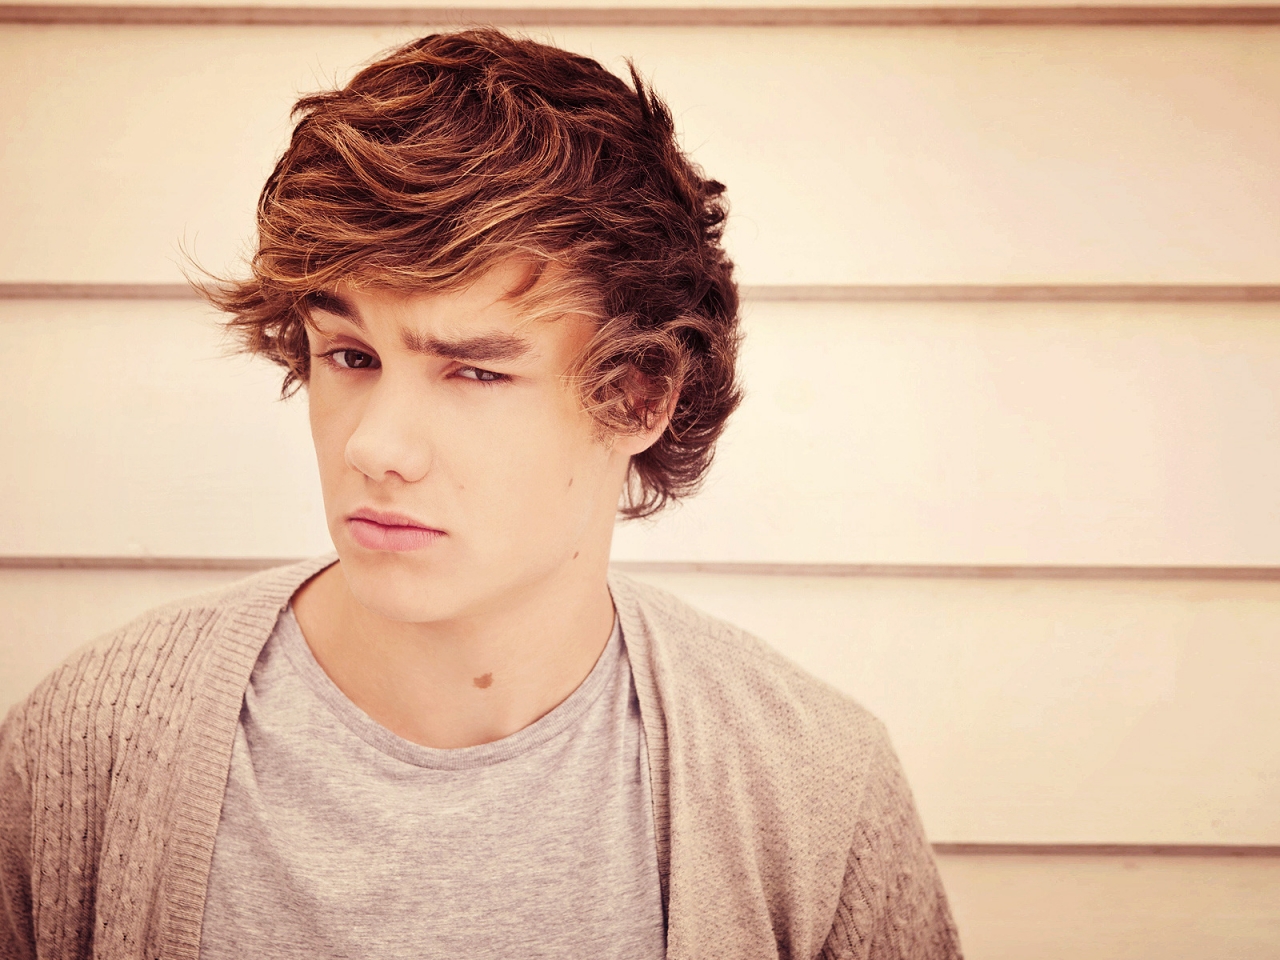 Liam Payne Look for 1280 x 960 resolution